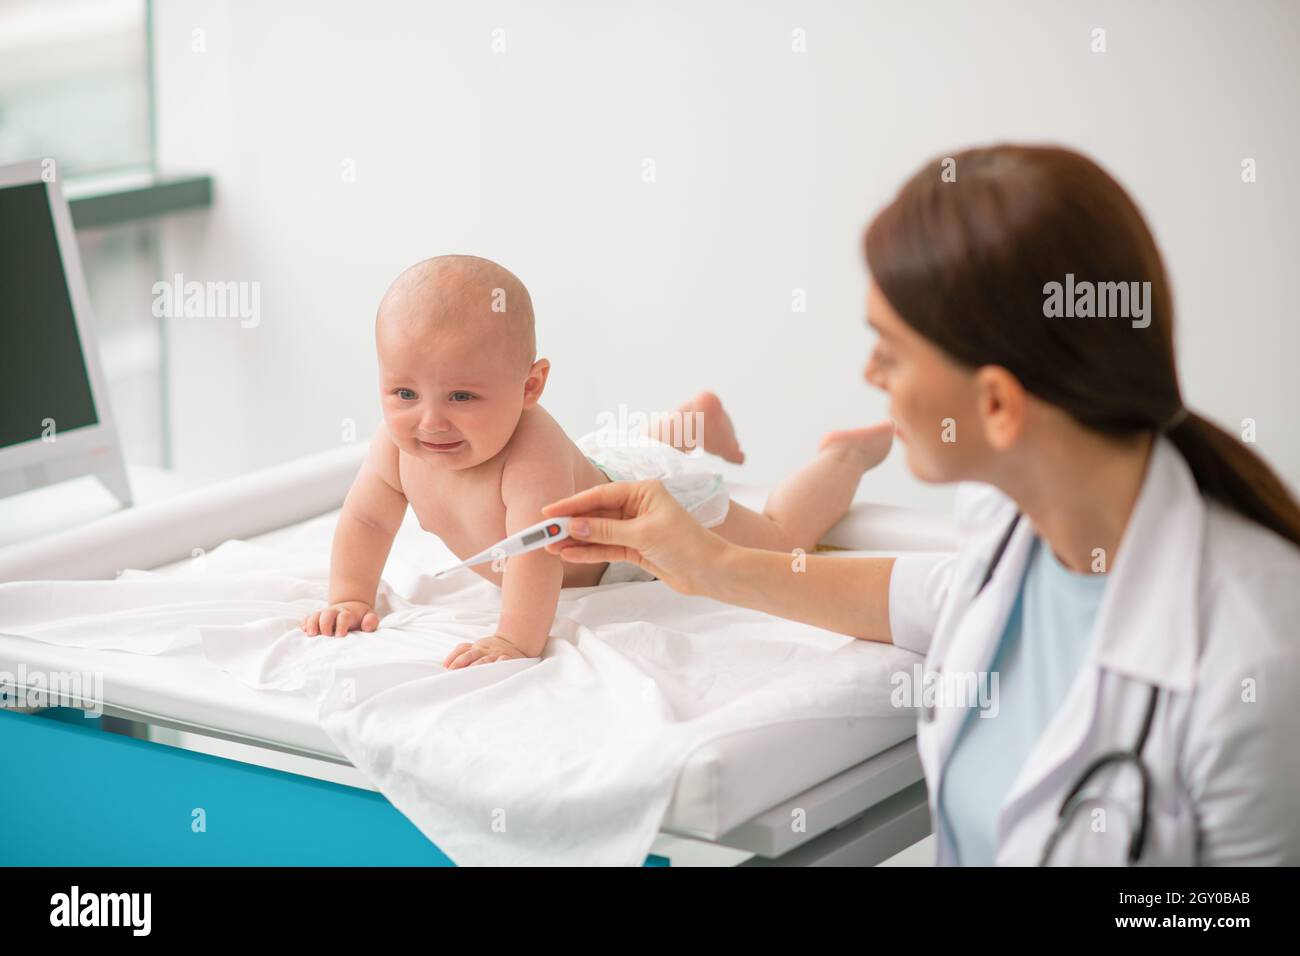 Experienced healthcare professional getting ready to take a newborn temperature Stock Photo